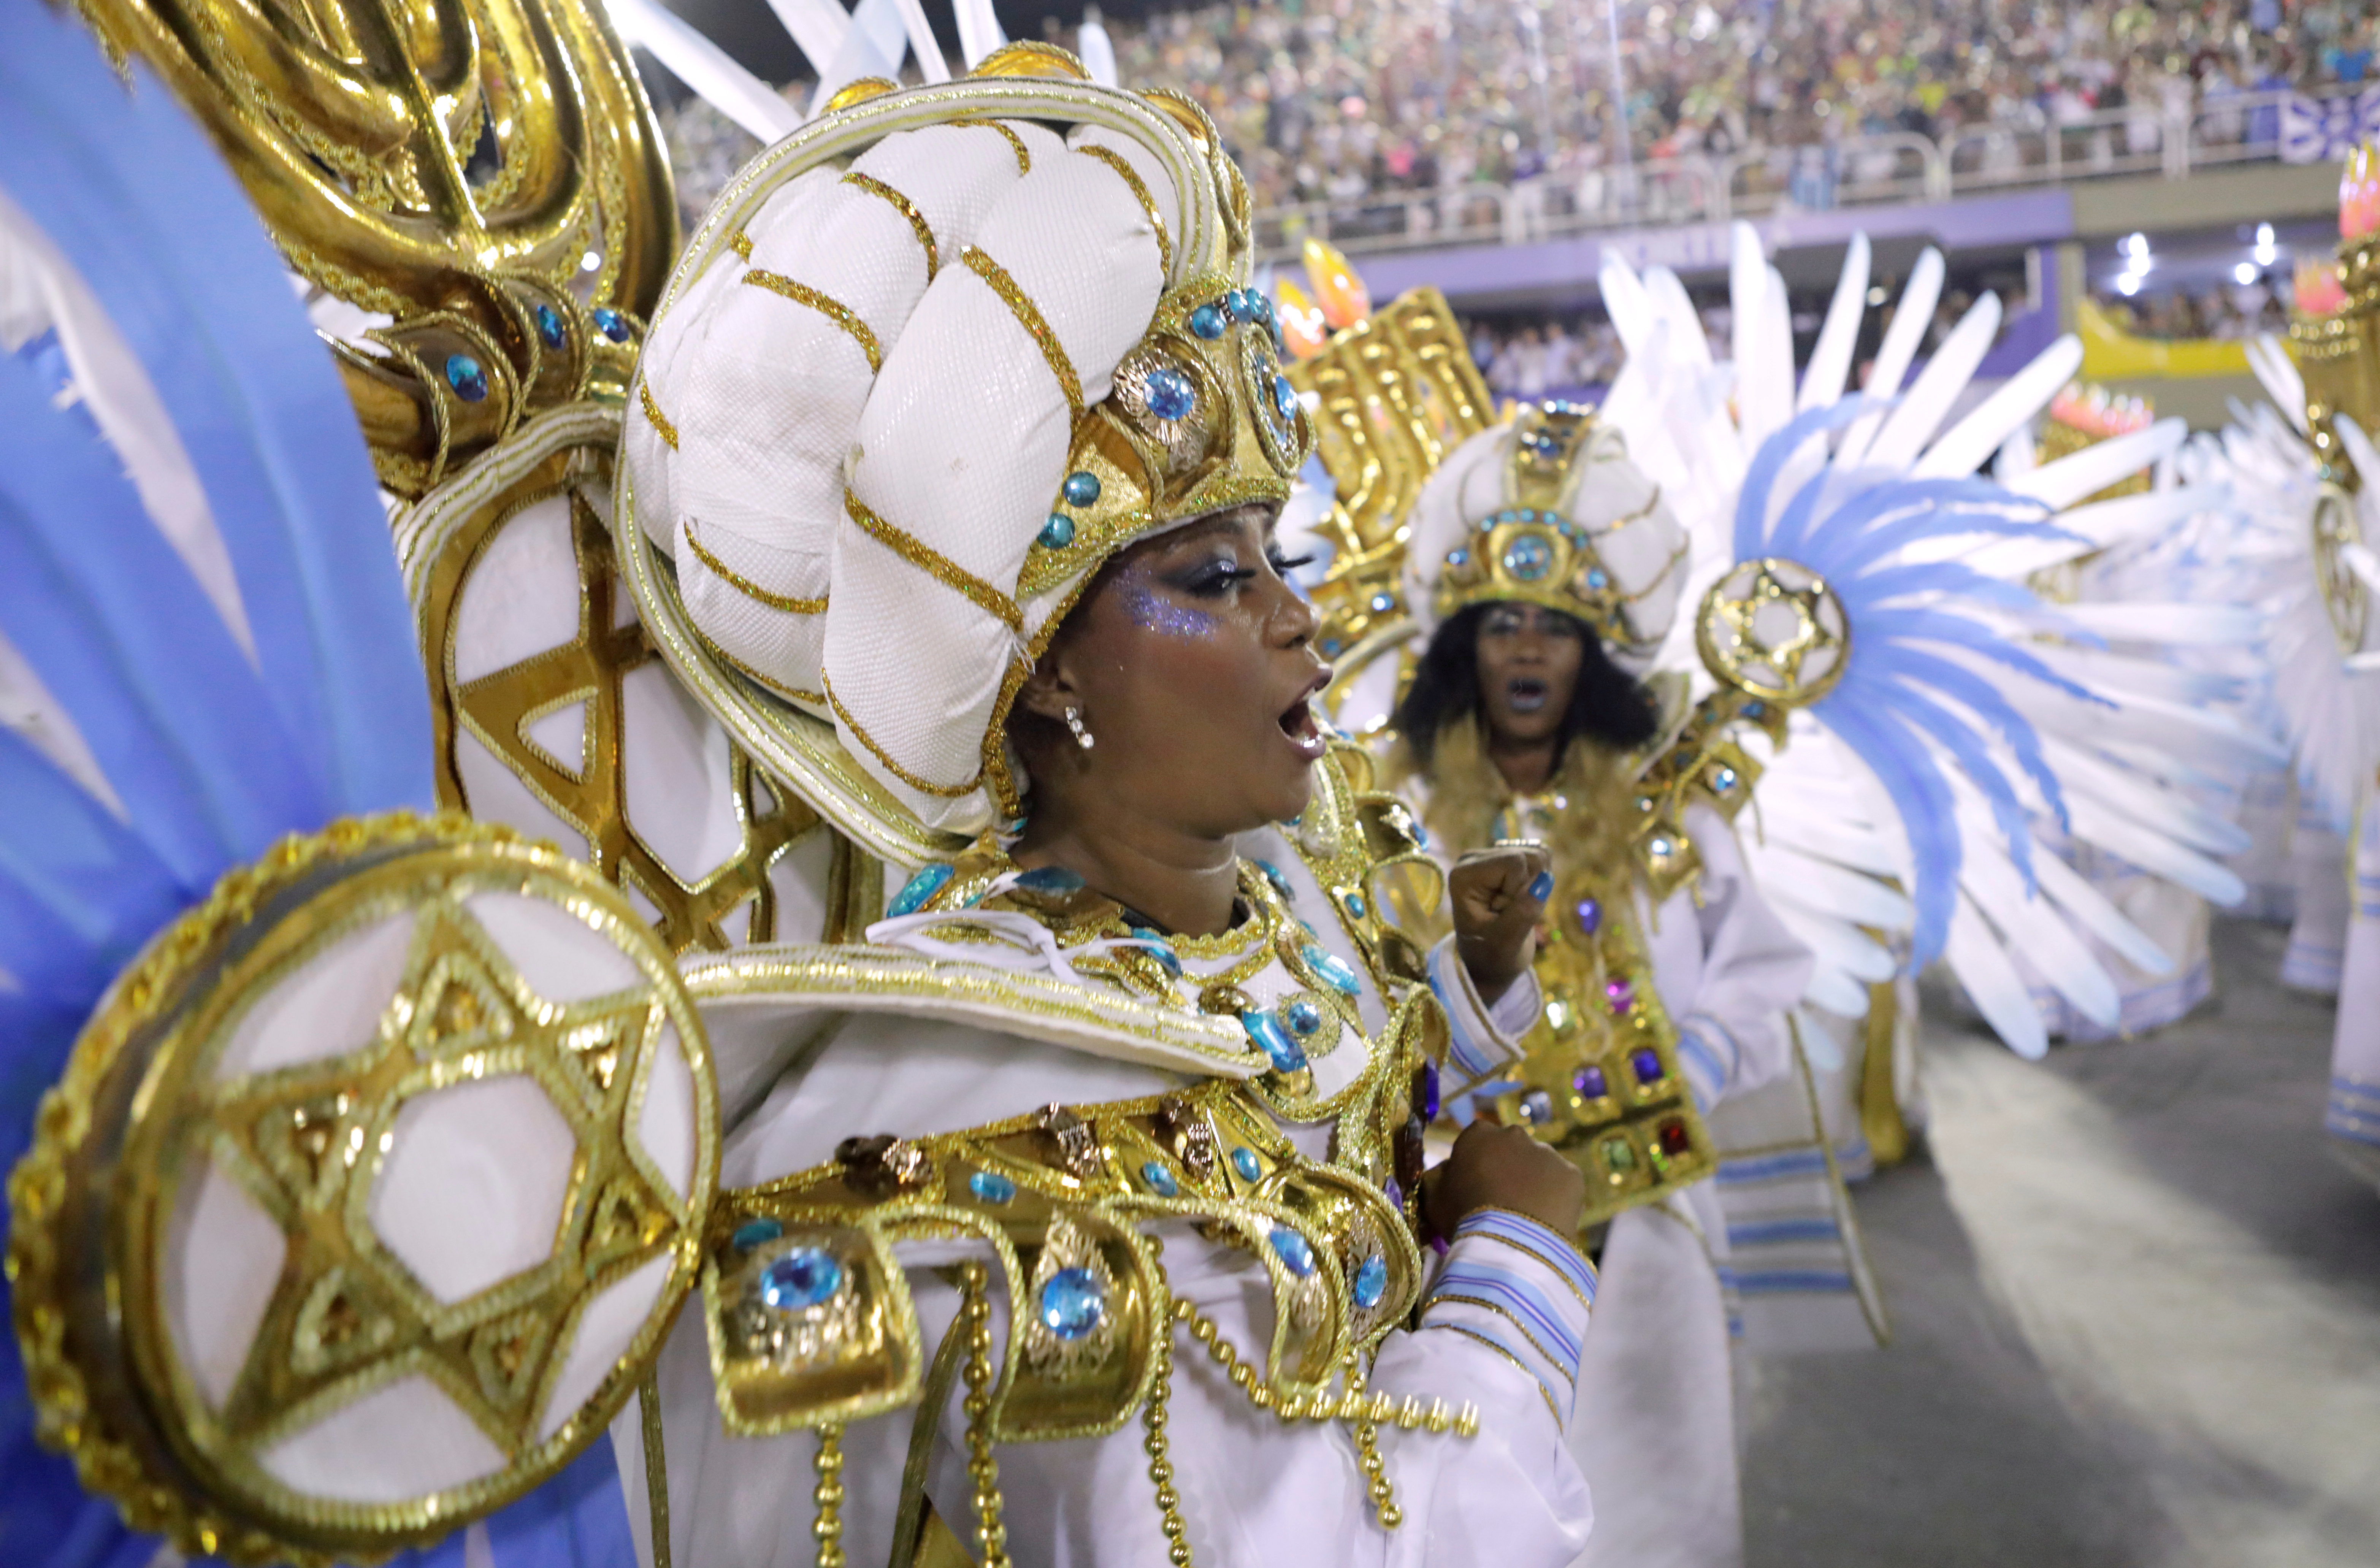 No way to hold Rio carnival in July, the city's mayor says